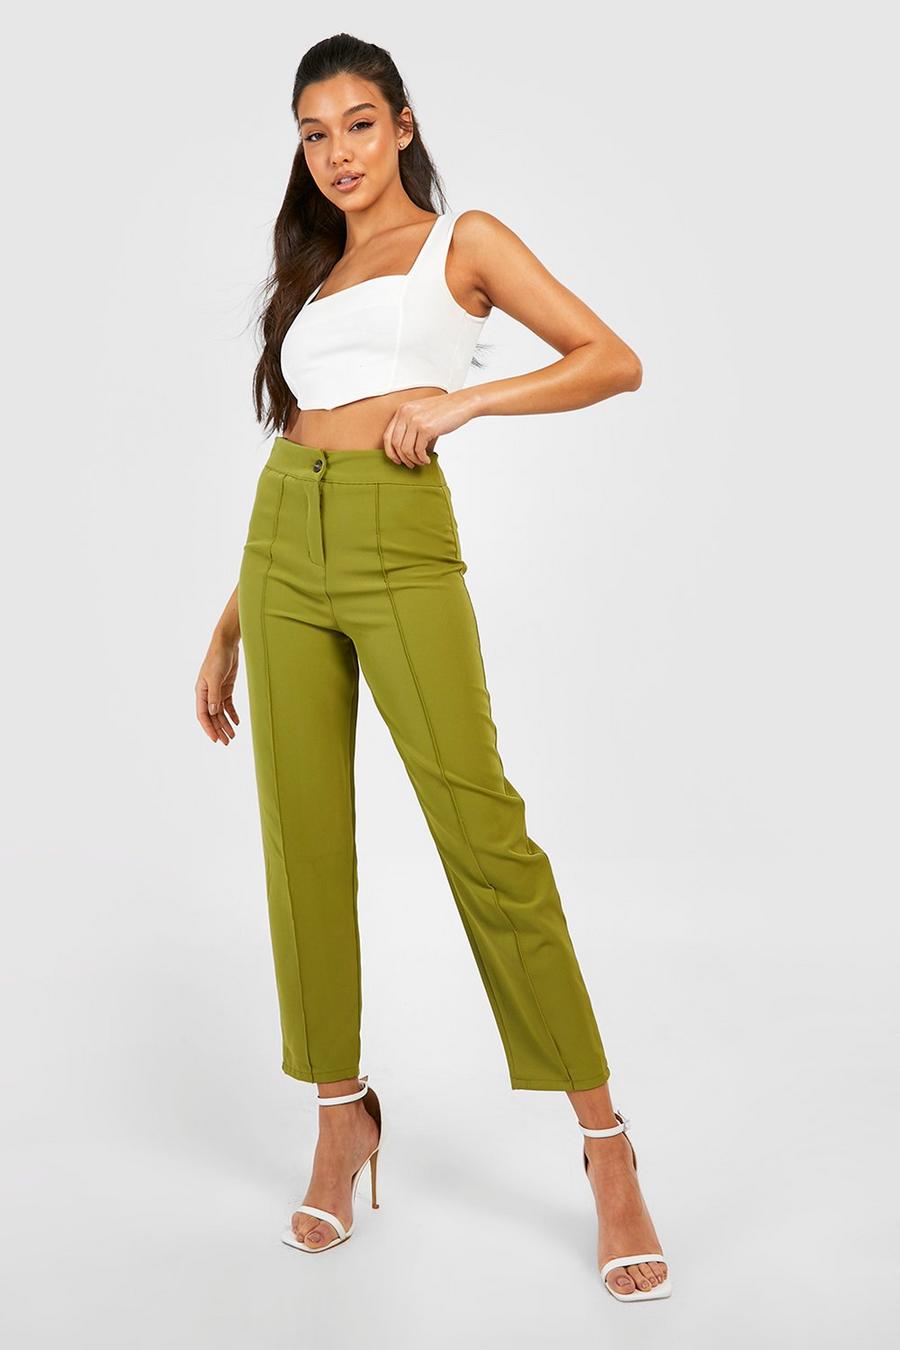 Olive green Woven Tapered High Waisted Pants